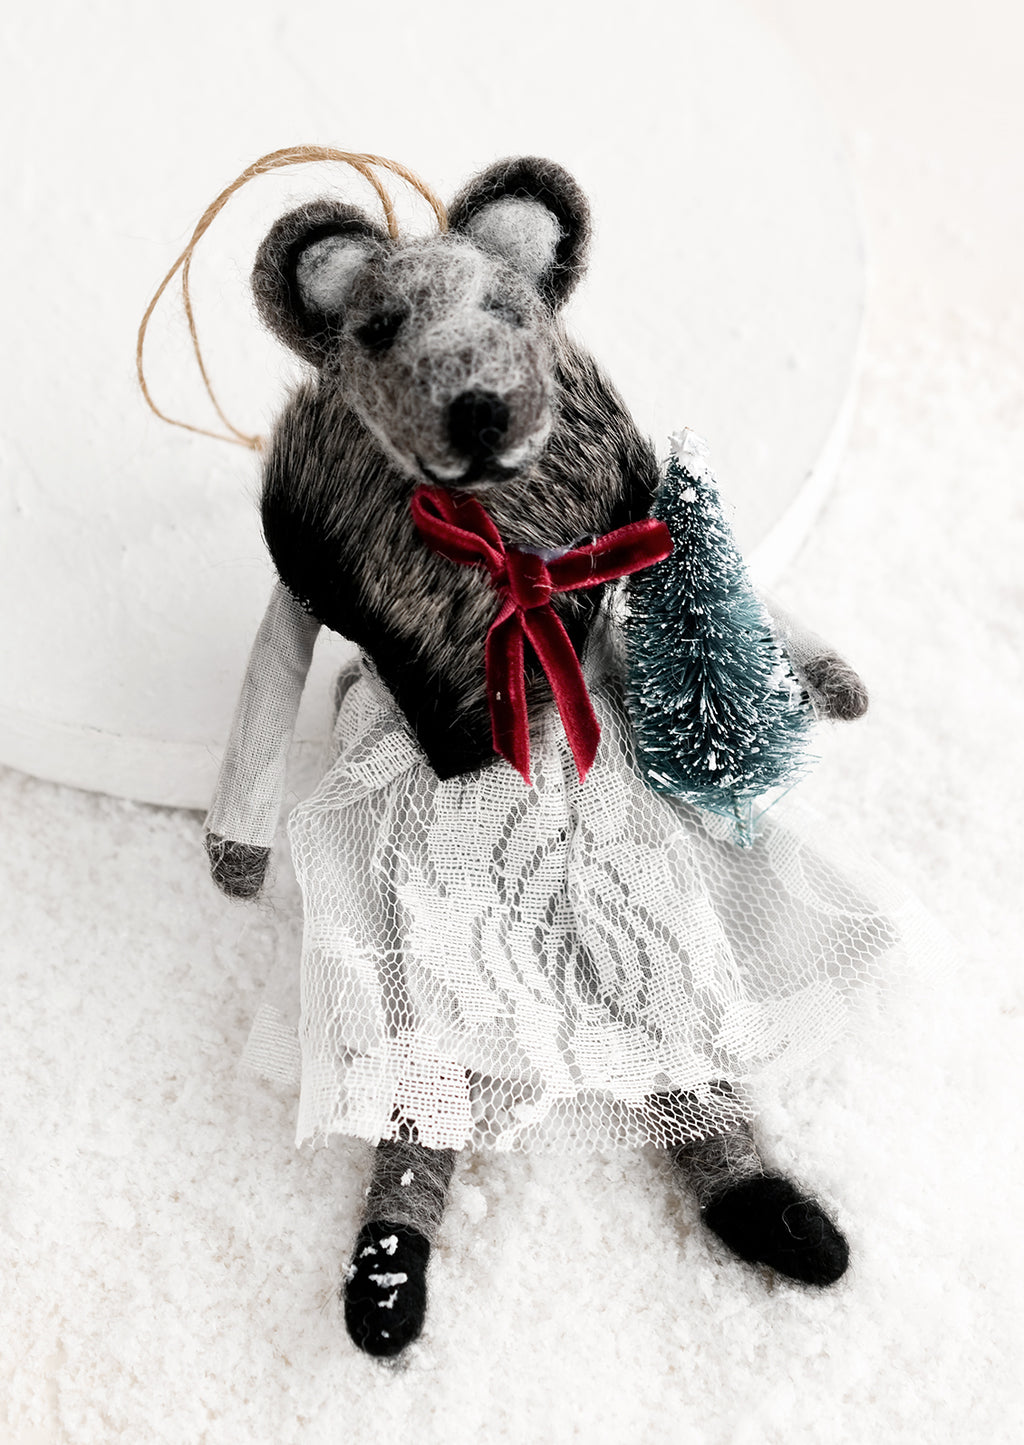 Tree: A felted holiday ornament of a badger wearing a dress, holding a tiny christmas tree.